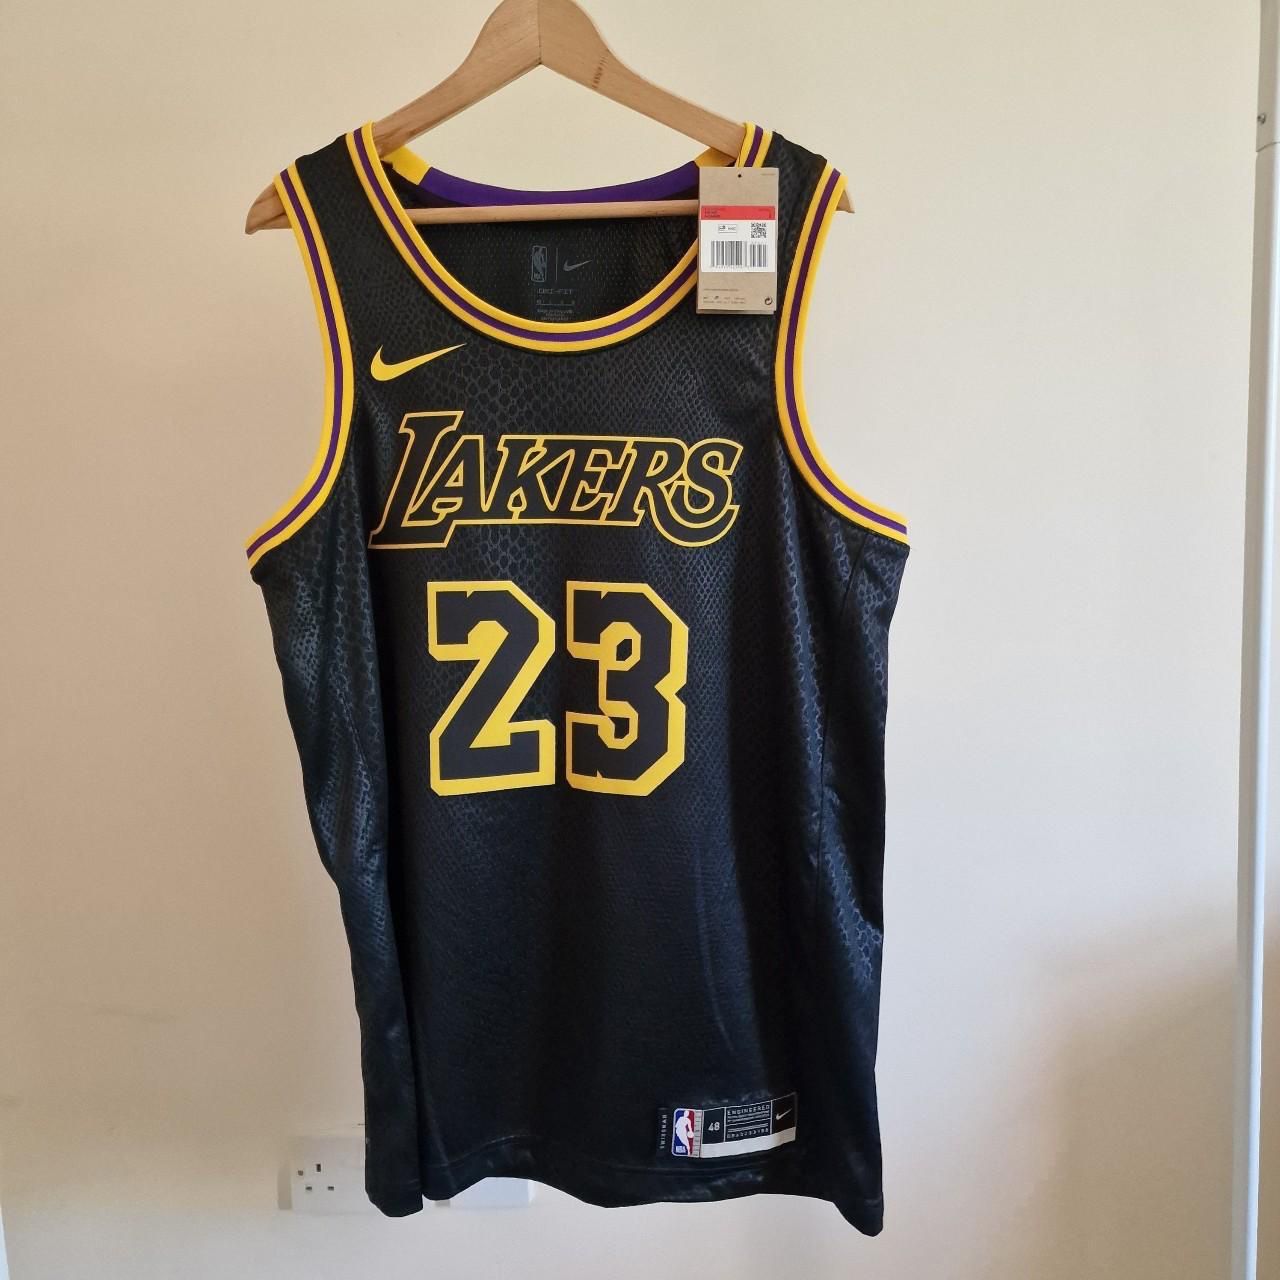 Lakers Black Short New With Tags for Sale in Palm Springs, CA